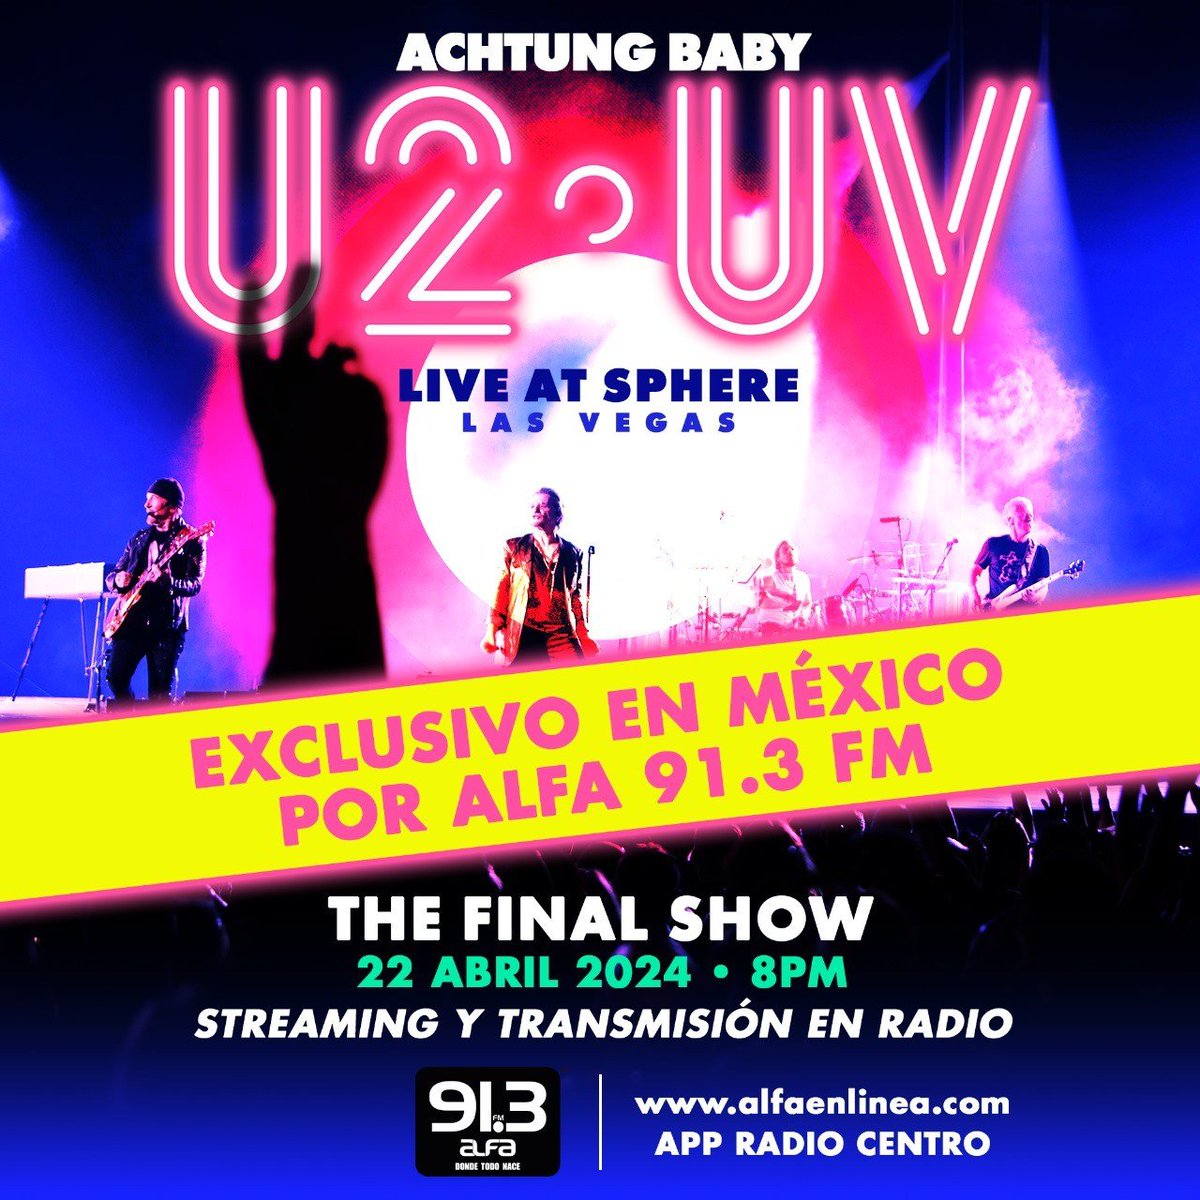 For those in Mexico waiting for information on the broadcast in your country, it's this evening. (Date and time was not originally included in the U2.com announcement, but has now been announced by the station.) #U2UVSphere